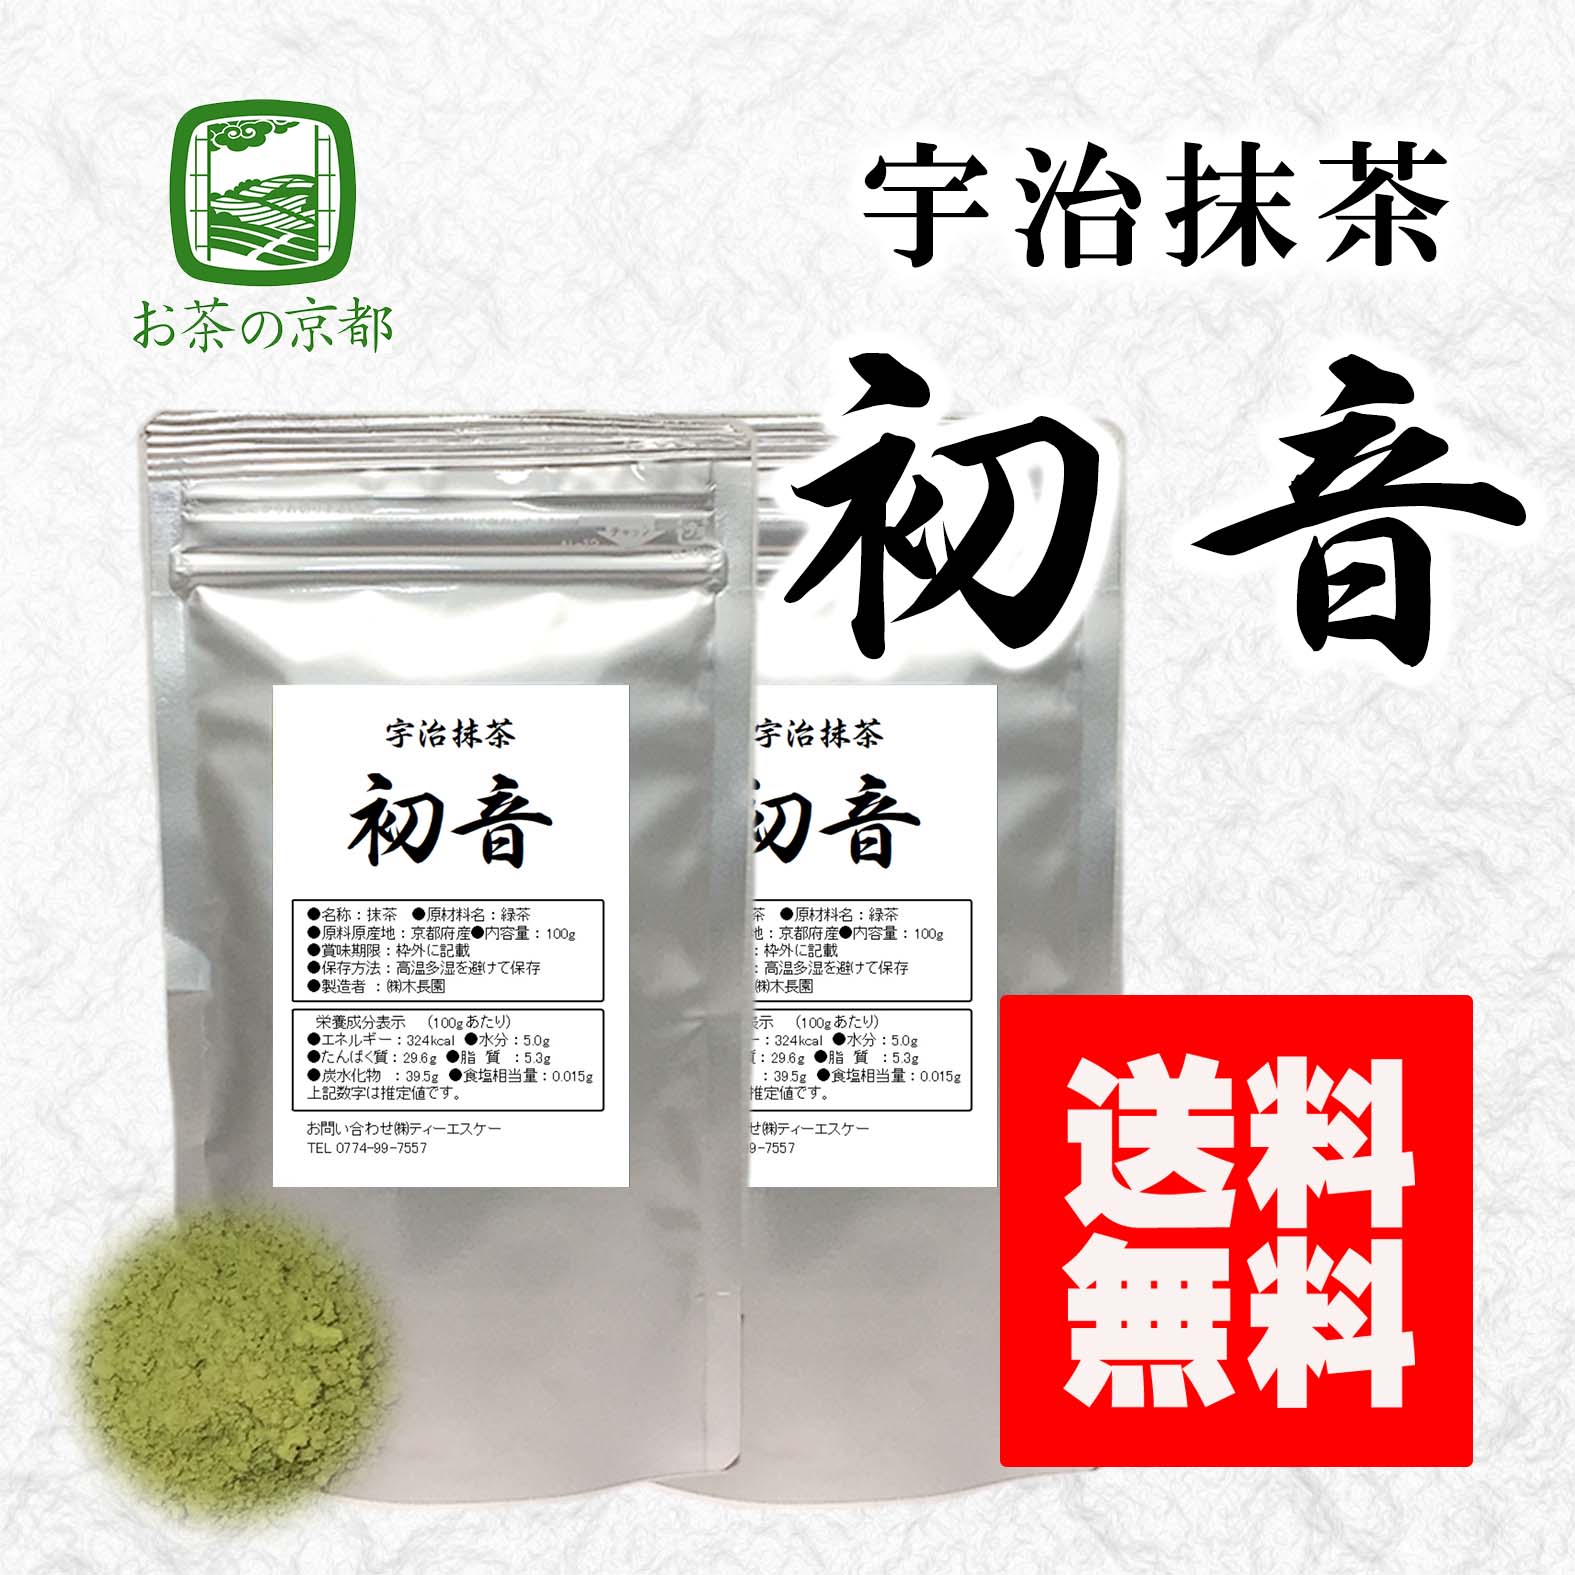  powdered green tea . light .. powdered green tea the first sound 200g Kyoto (metropolitan area) production 100% confectionery powder powder free shipping 